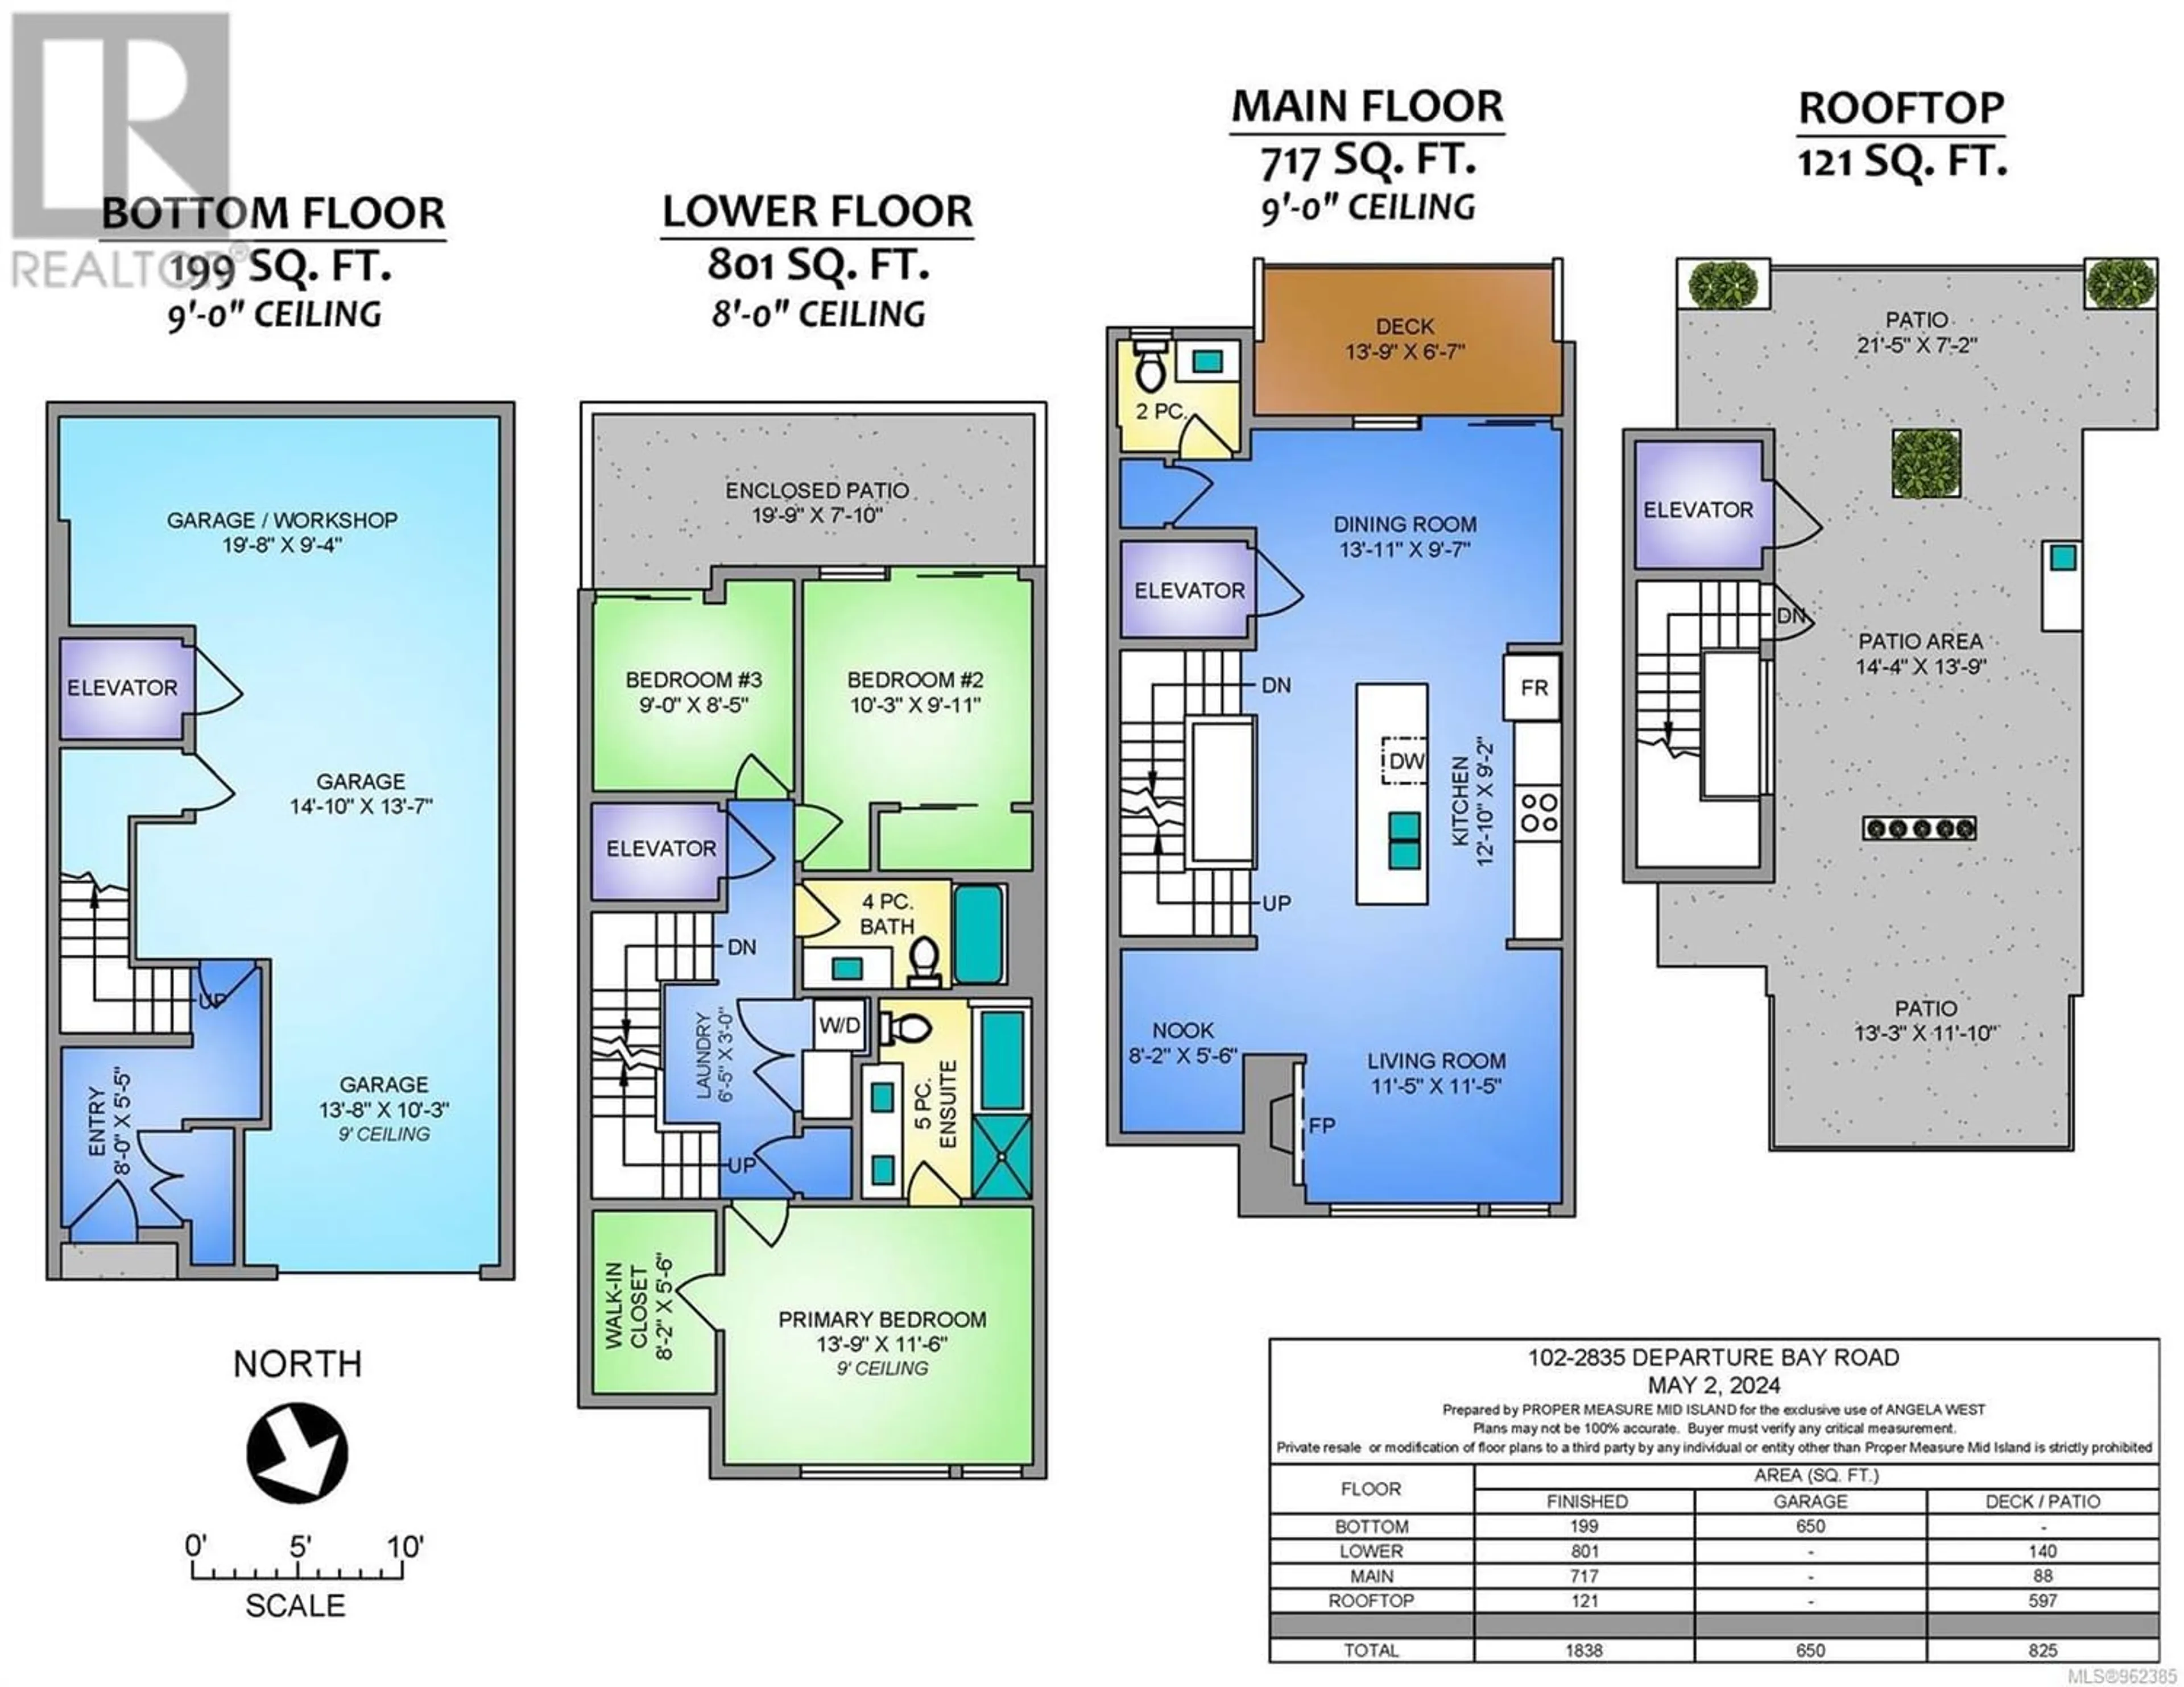 Floor plan for 102 2835 Departure Bay Rd, Nanaimo British Columbia V9S3X1